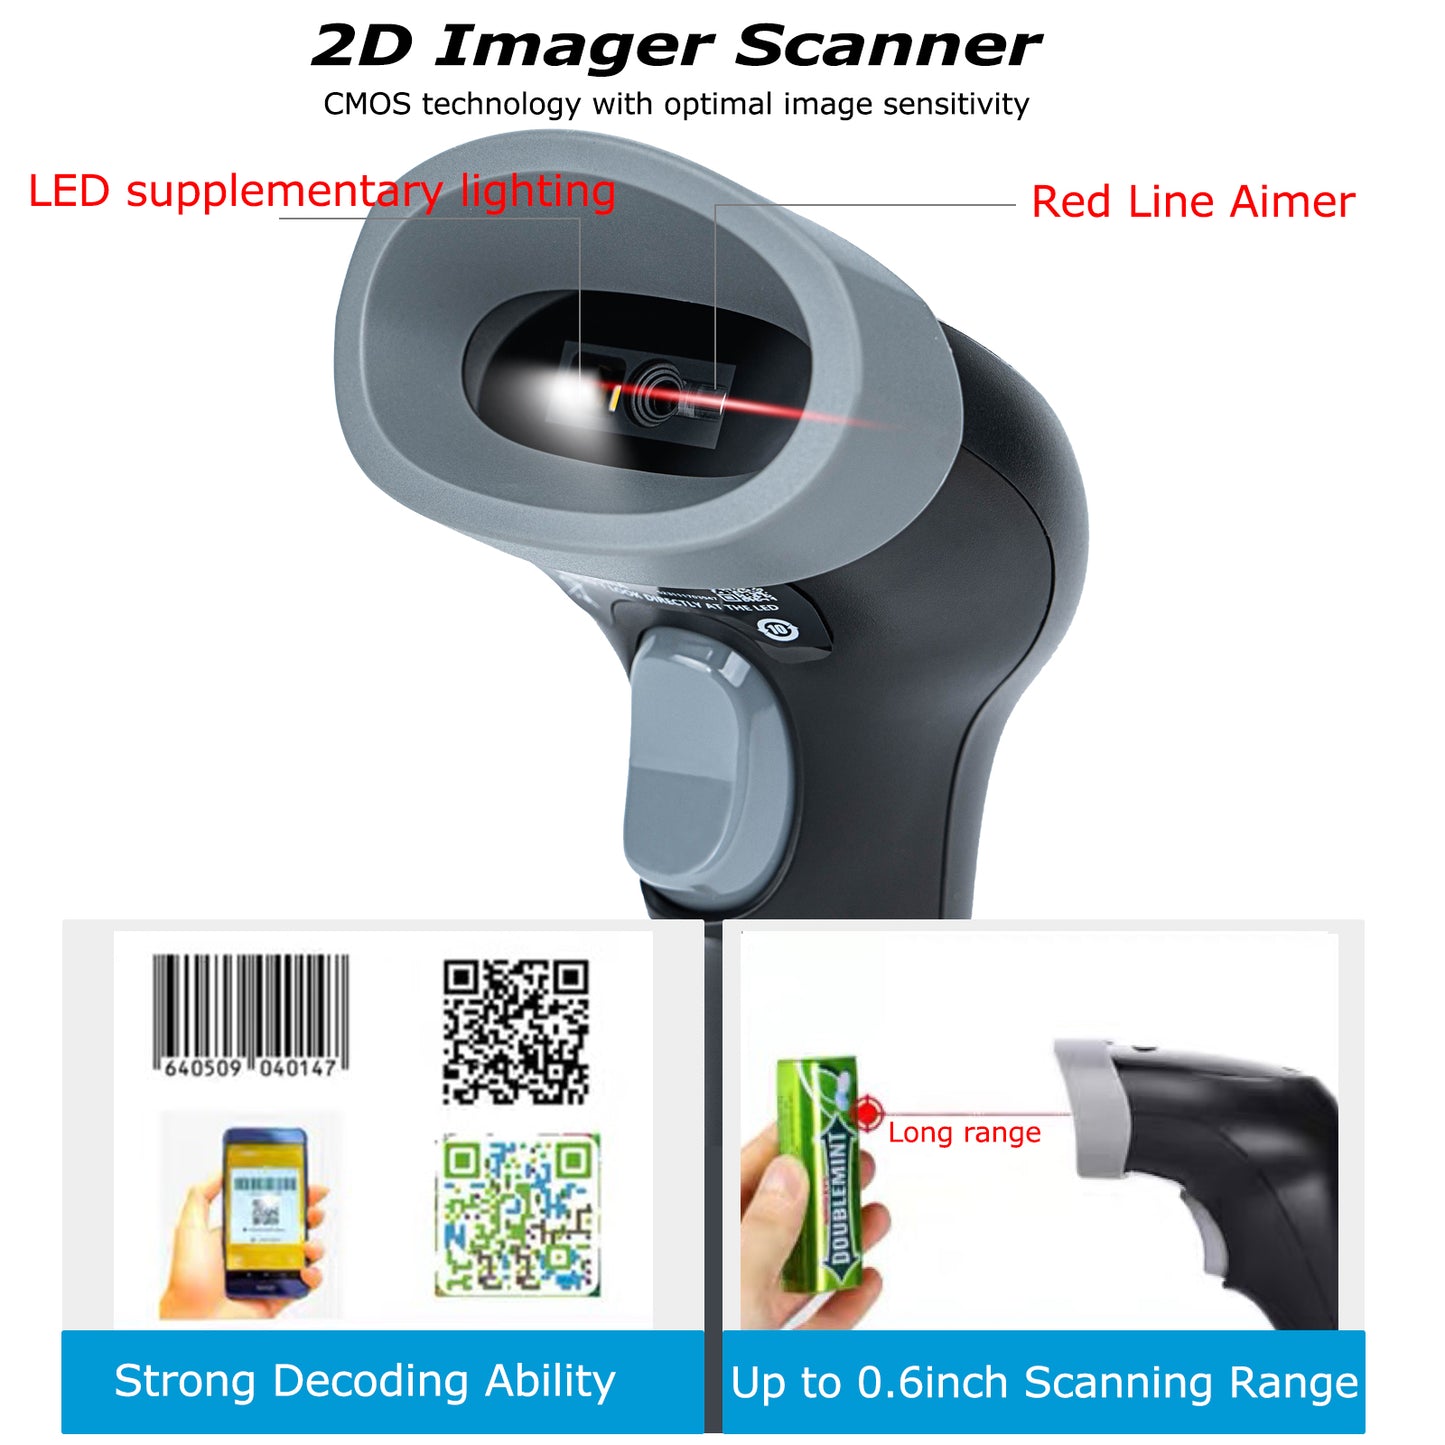 TEEMI TMSL-77 Barcode Scanner with Stand USB Wired Inventory 2D 1D QR Code Scanners for Computer POS Support Handsfree Mode, Handheld CMOS Imager Bar Code Reader for Retail Hospitality Office